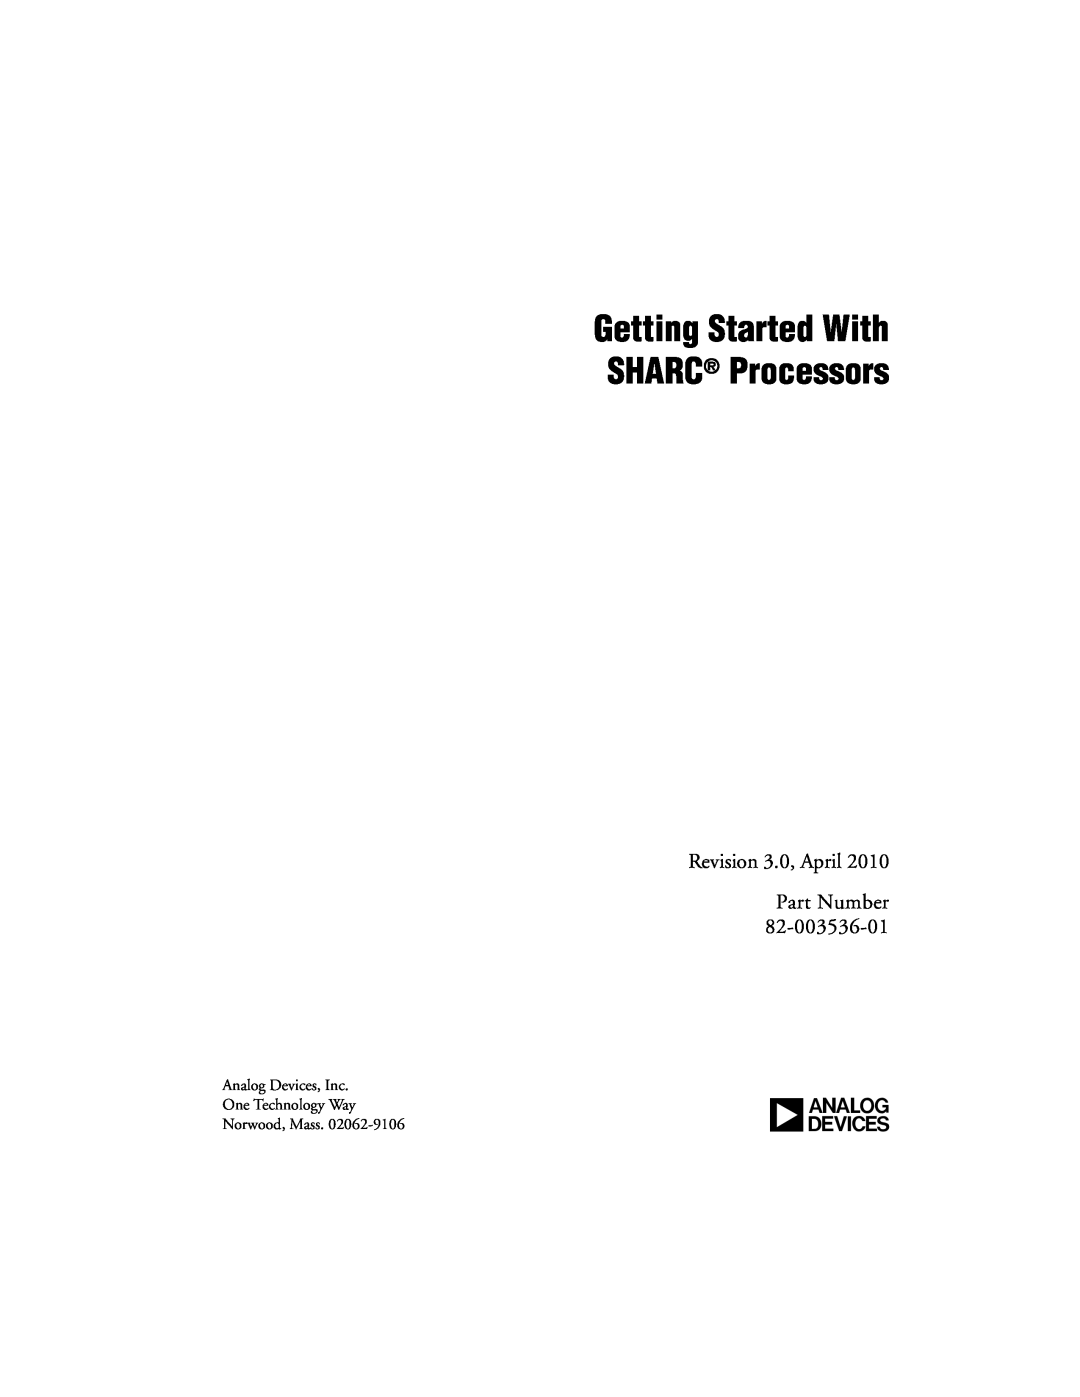 Analog Devices 82-003536-01 manual Getting Started With SHARC Processors 